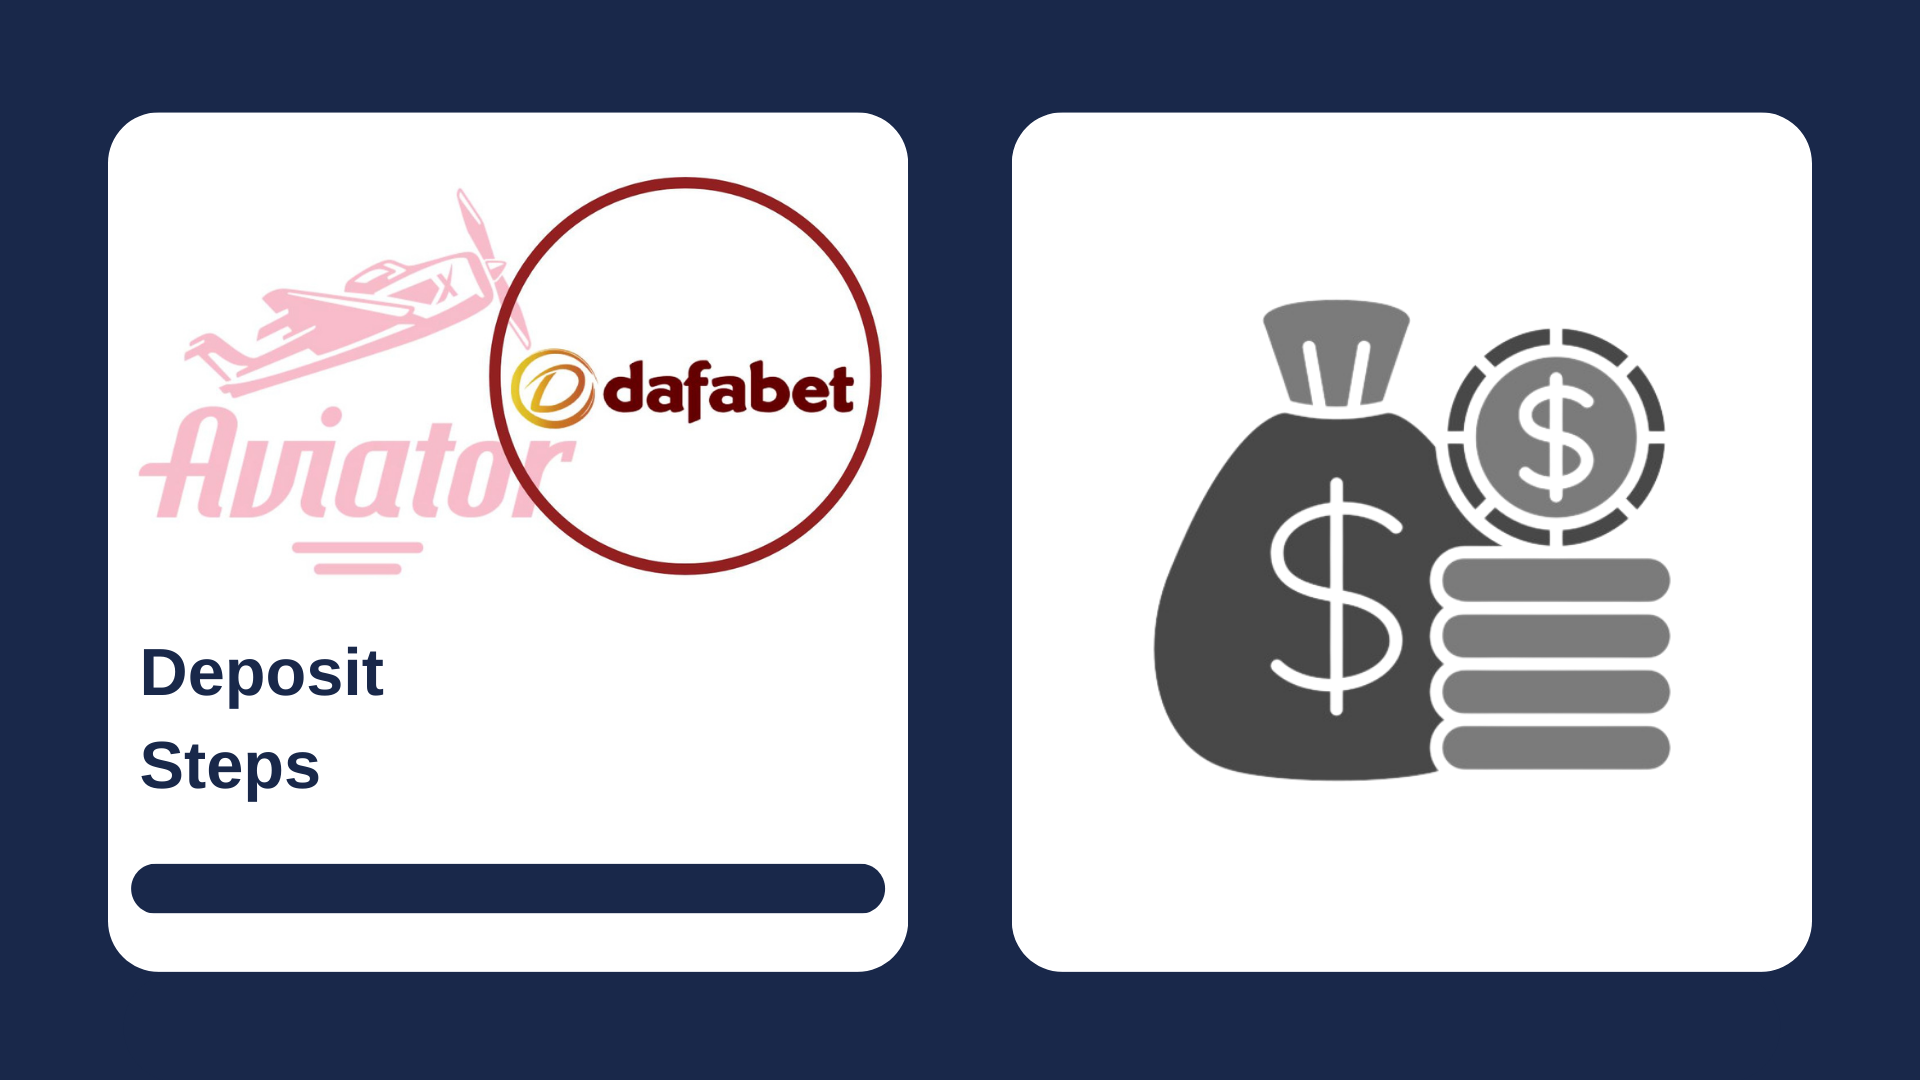 First picture showing Aviator and Dafabet logos with text, and second - deposit money icon